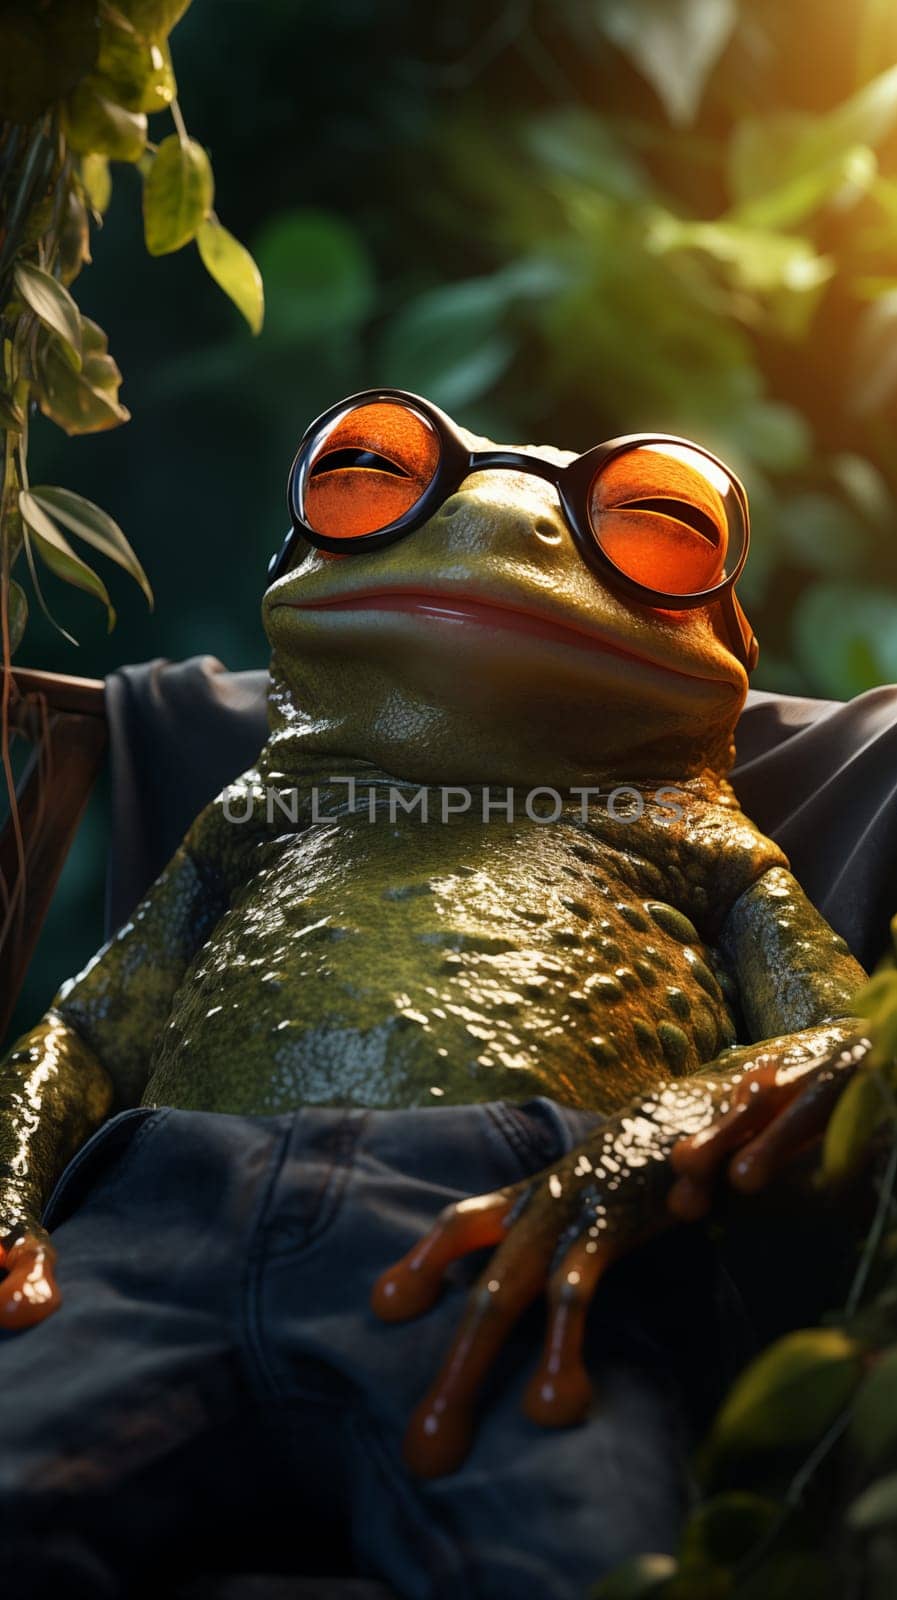 Stylish Frog Lounging in Sunglasses relaxed in a chair amidst foliage by Zakharova